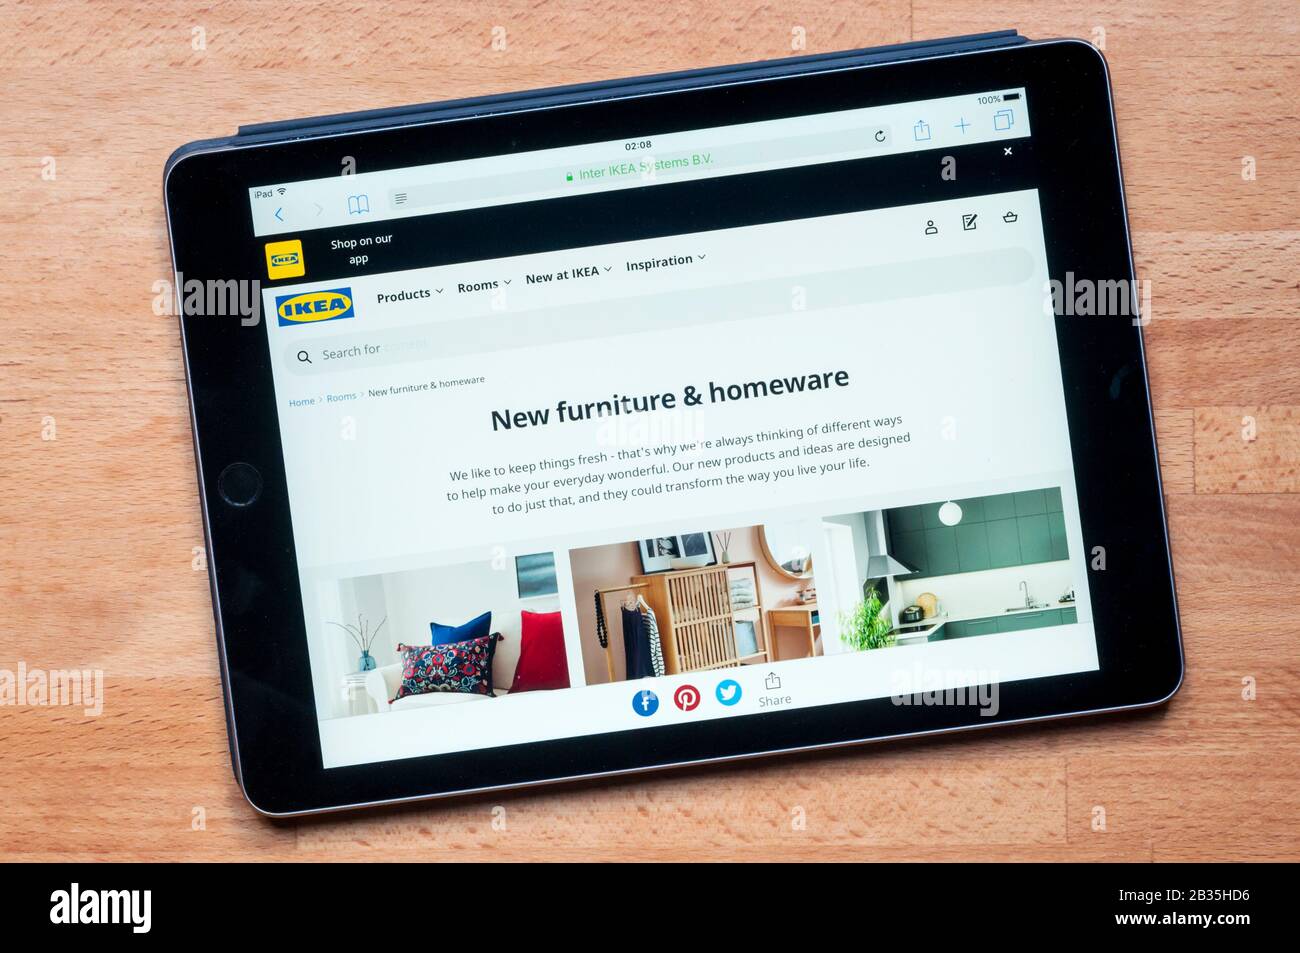 The website of Homebase furniture sellers & DIY store displayed on an iPad tablet computer against a pine worktop background. Stock Photo